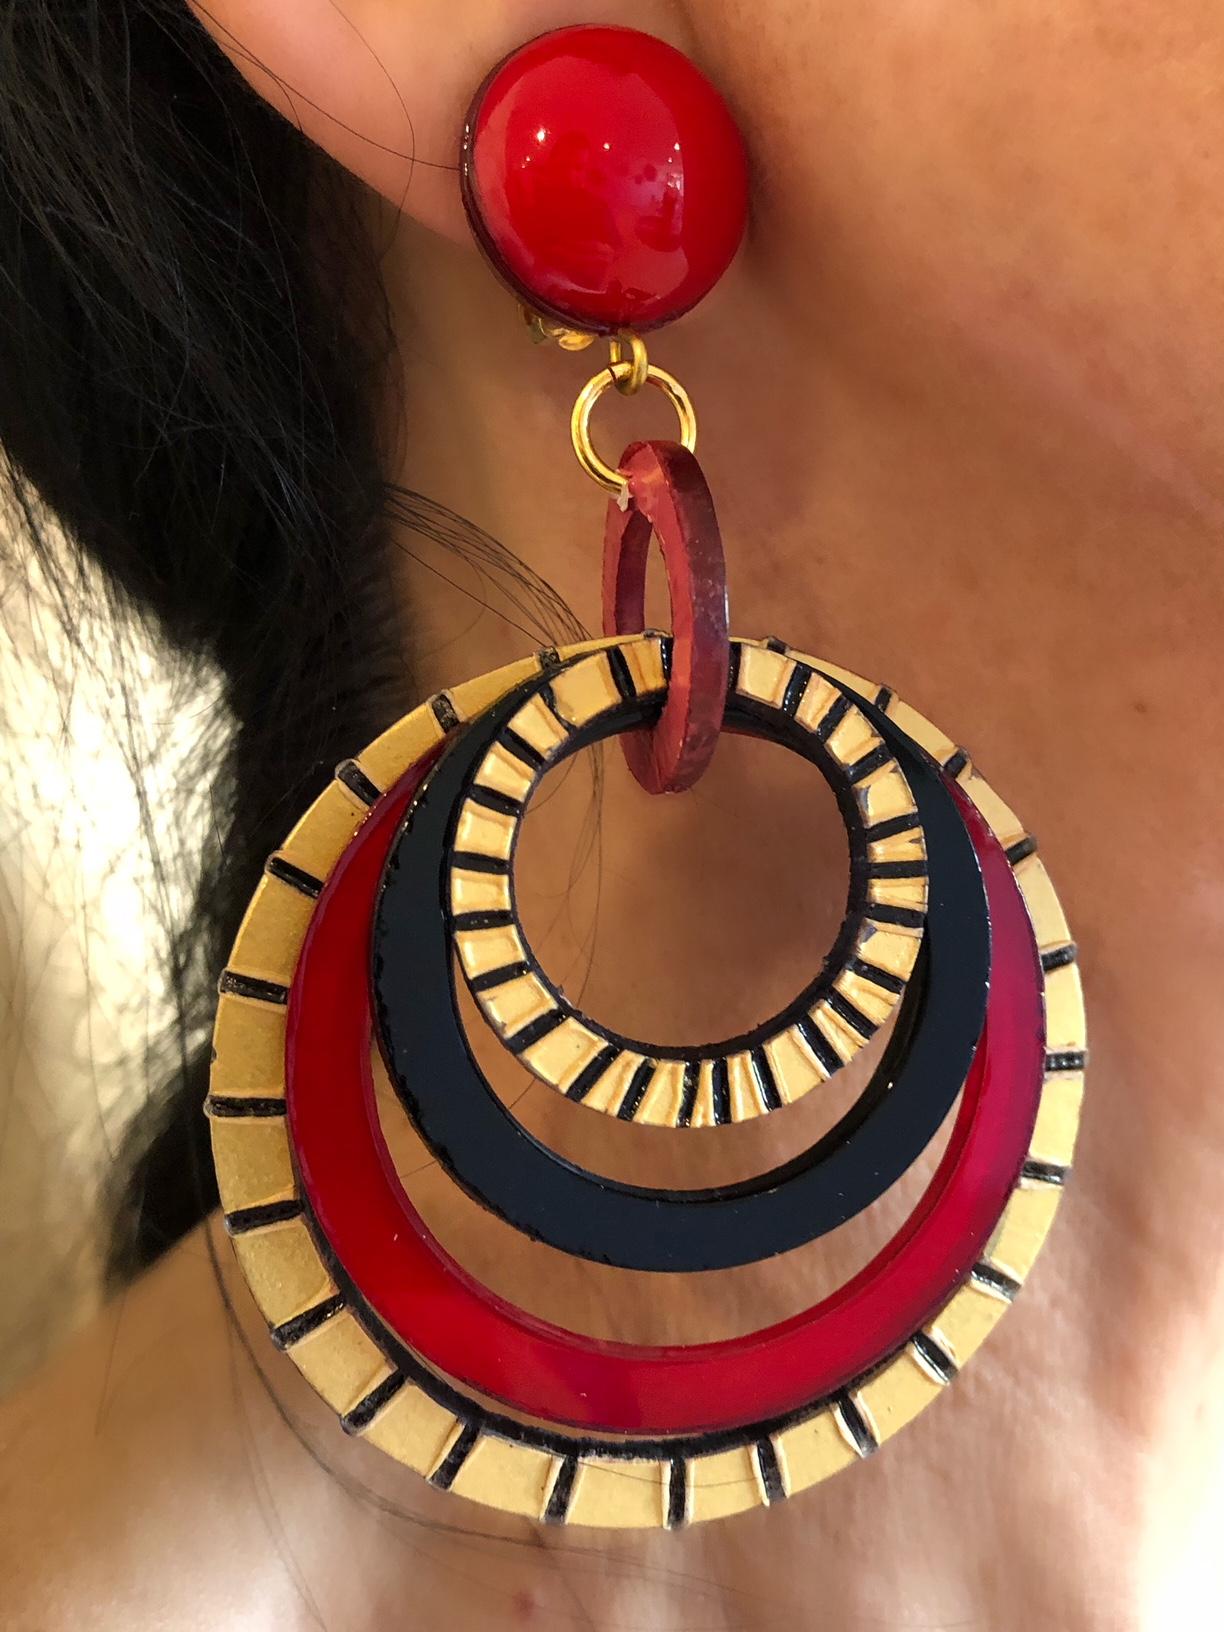 Light and easy to wear, these handmade artisanal hoop clip-on earrings were made in Paris by Cilea. The earrings are comprised of black, red and gold enameline (resin and enamel composite) and depict three-dimensional pop art circles. Throughout the